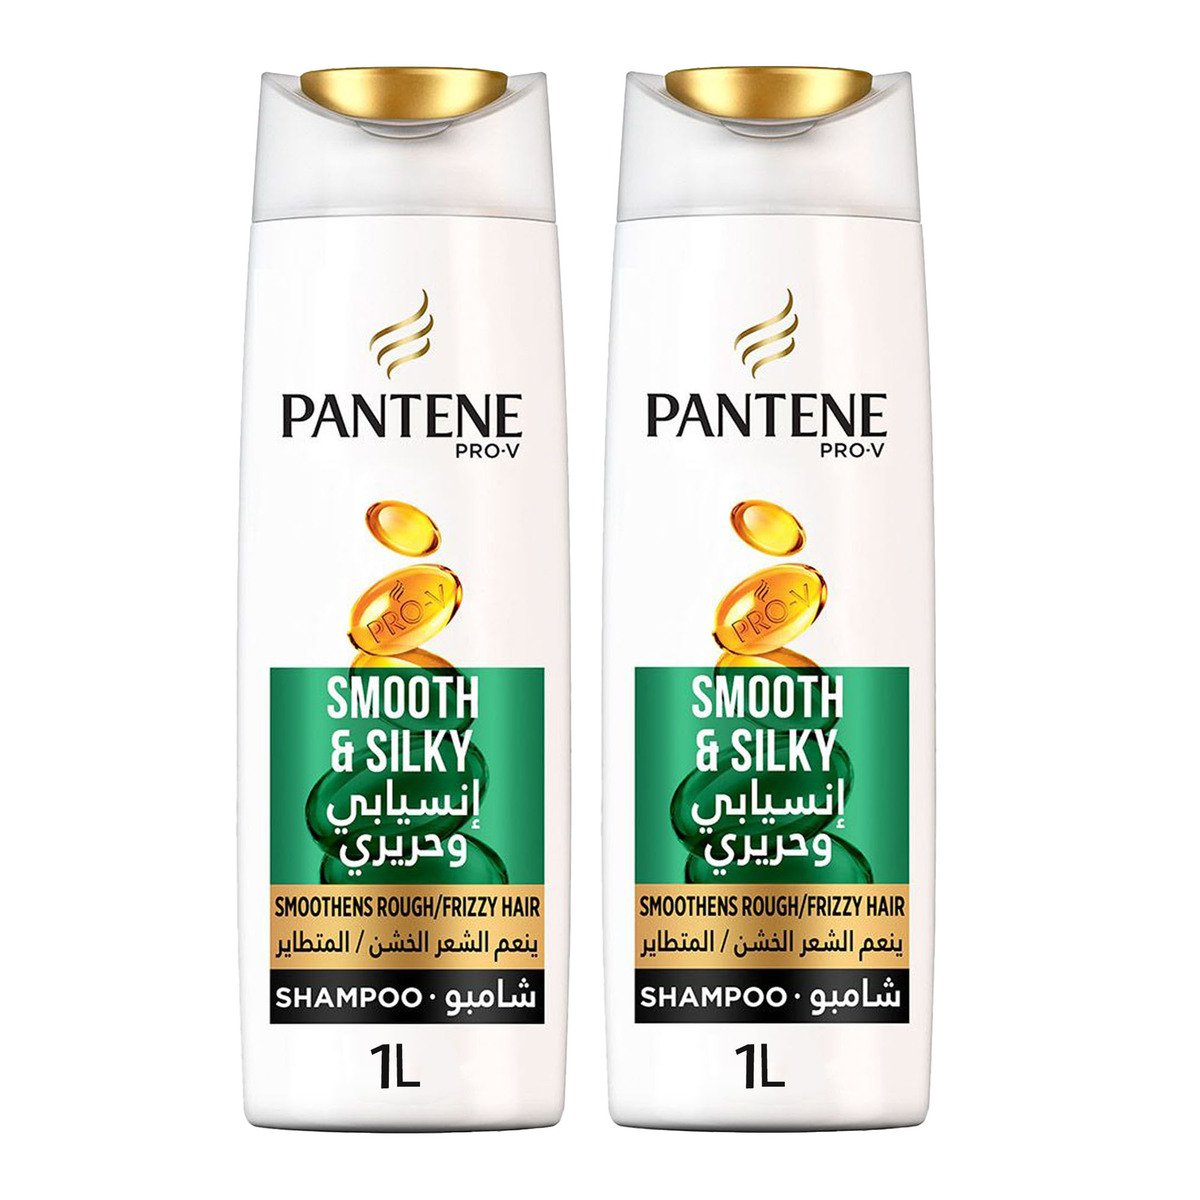 Pantene Smooth & Silky Shampoo Value Pack 2 x 1 Litre